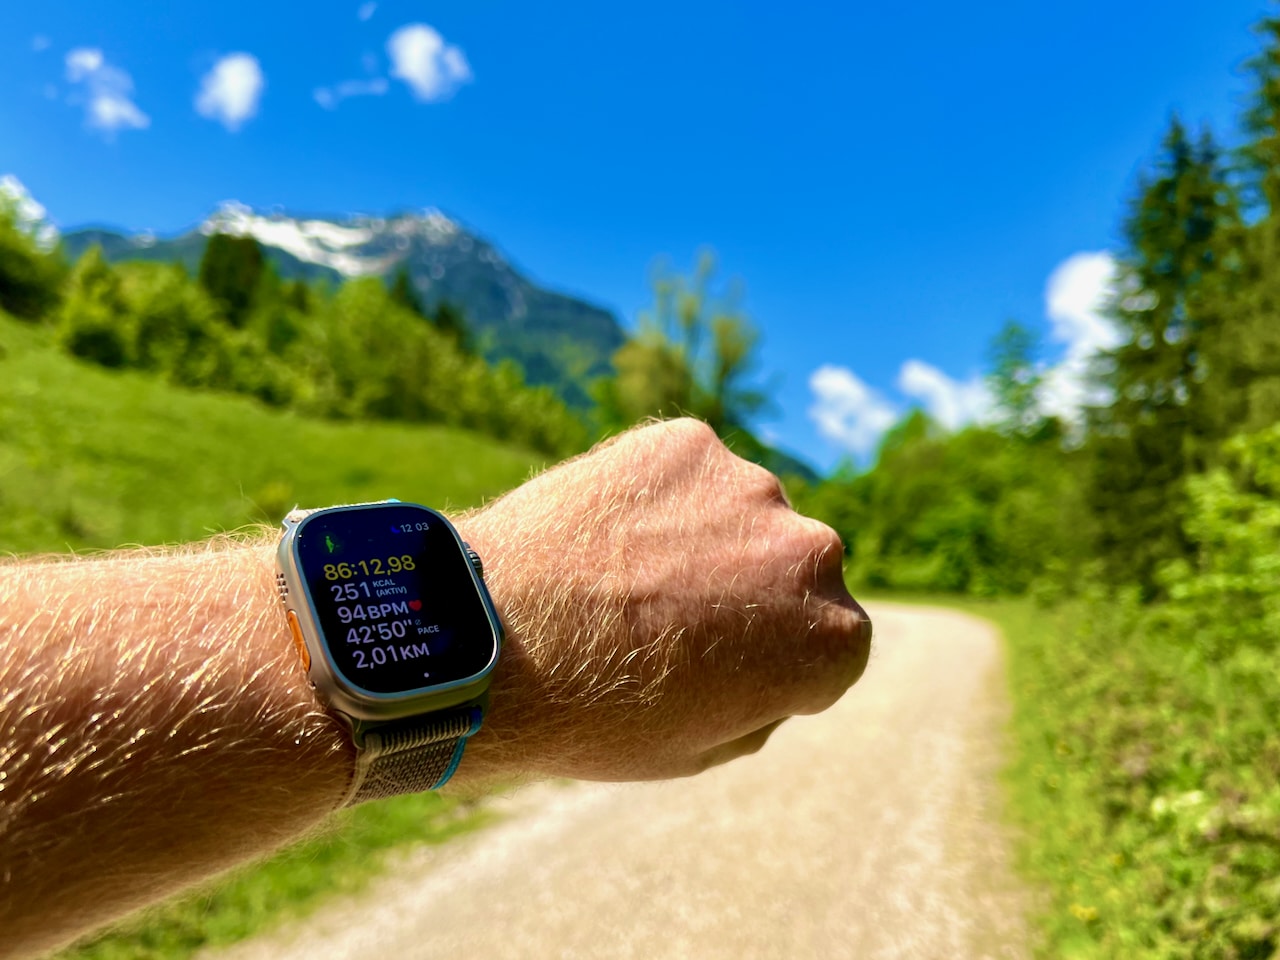 When I run in foreign terrain, like recently in the Alps in Austria or in Croatia on the island of Krk, I also use the functions mentioned Apple Maps map to orient myself and the compass backtrack, which records your path and guides you back to your starting point if necessary. Apple Watch Ultra trail running experiences tips experience report